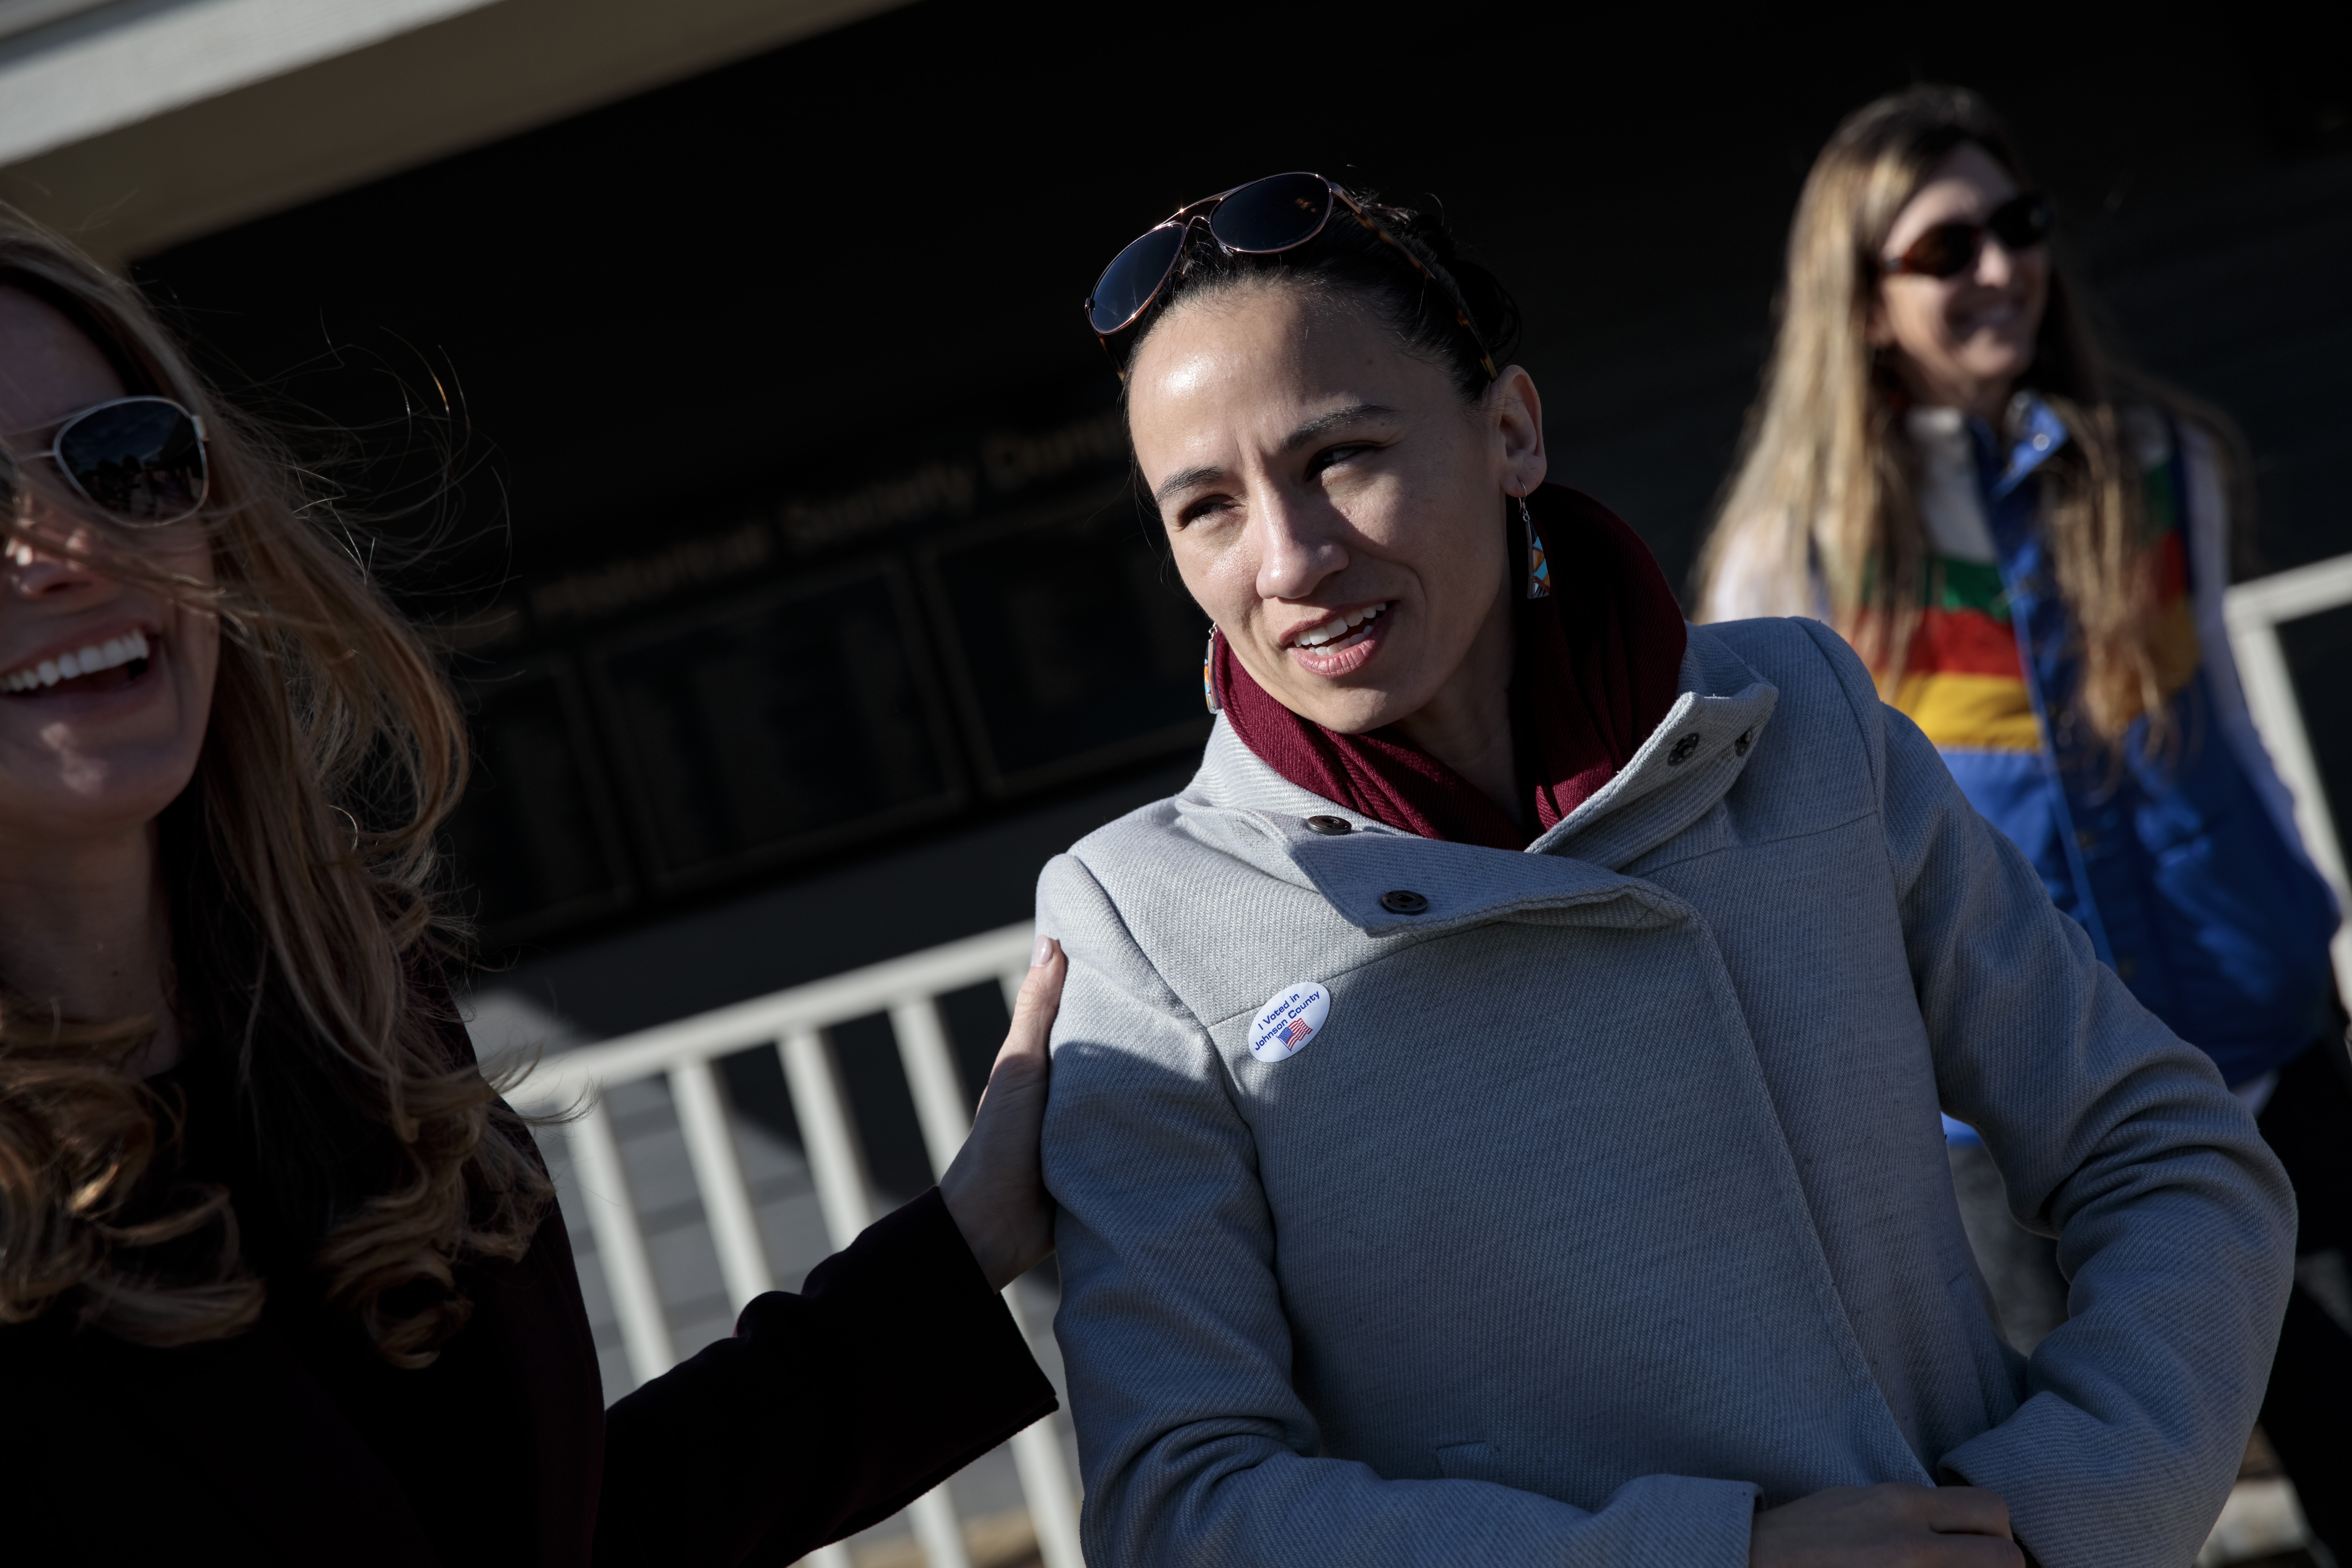 Kansas Congressional Candidate Sharice Davids Casts Her Vote In Midterm Election